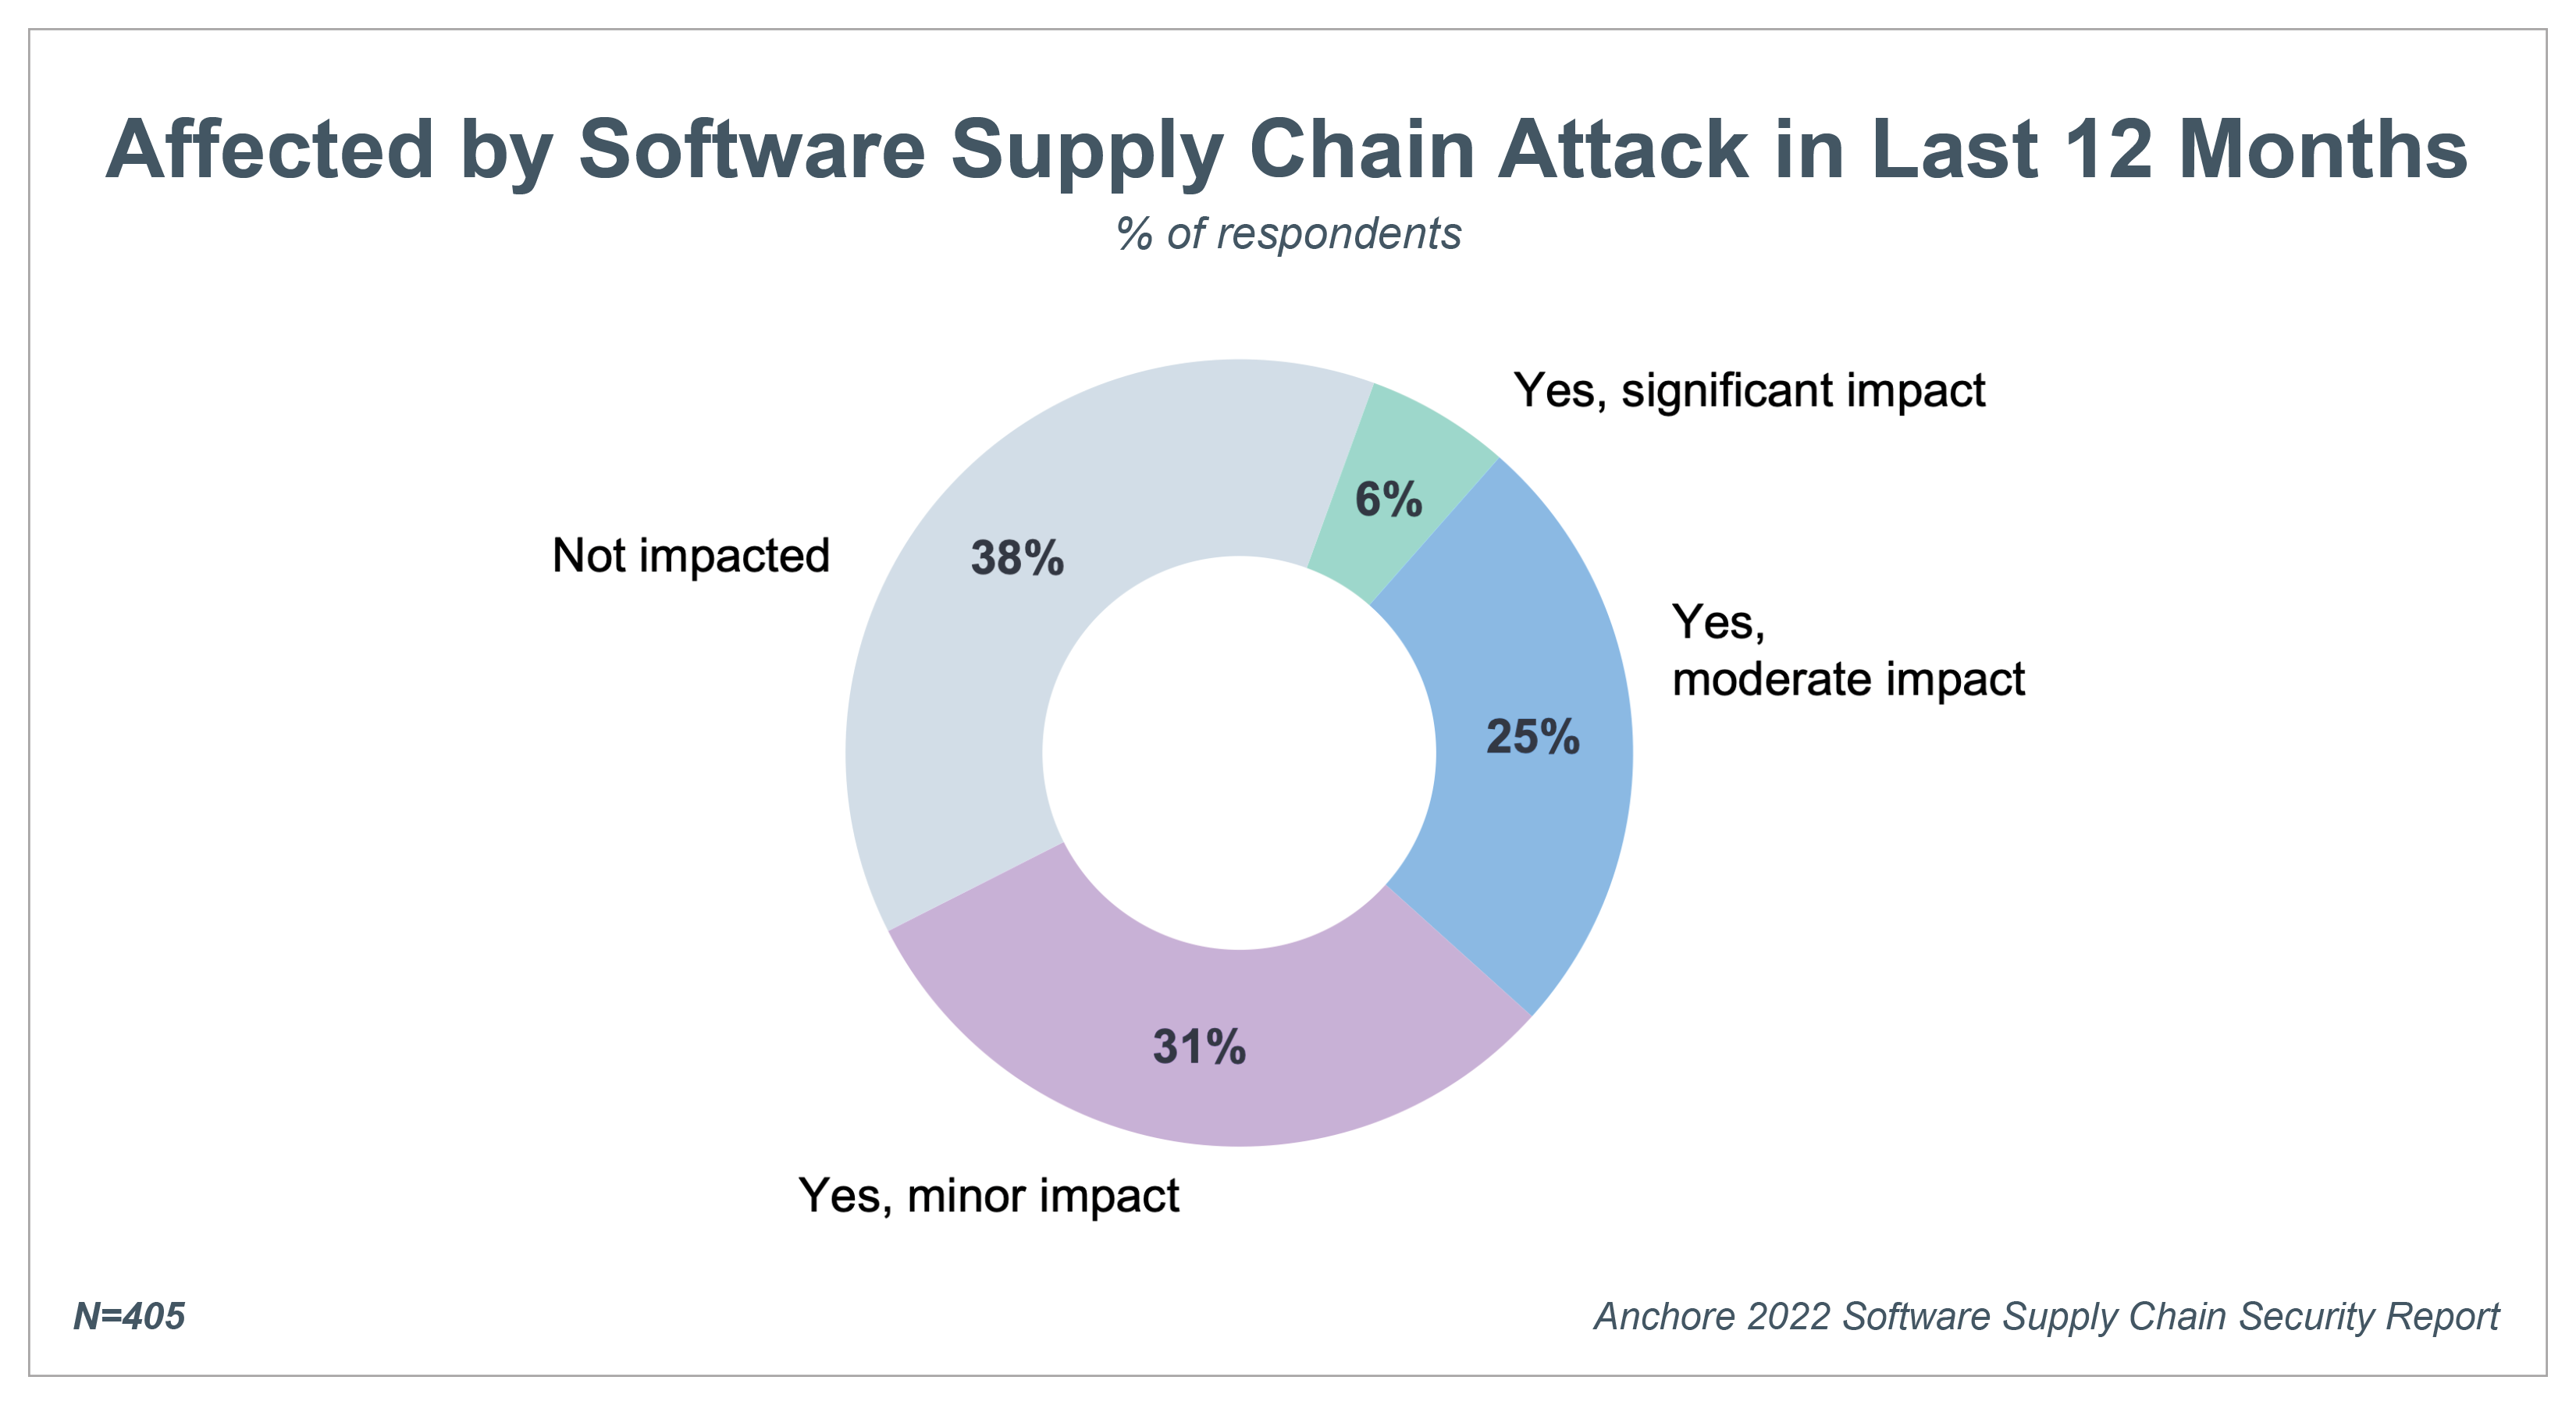 Software supply chain attack impacts